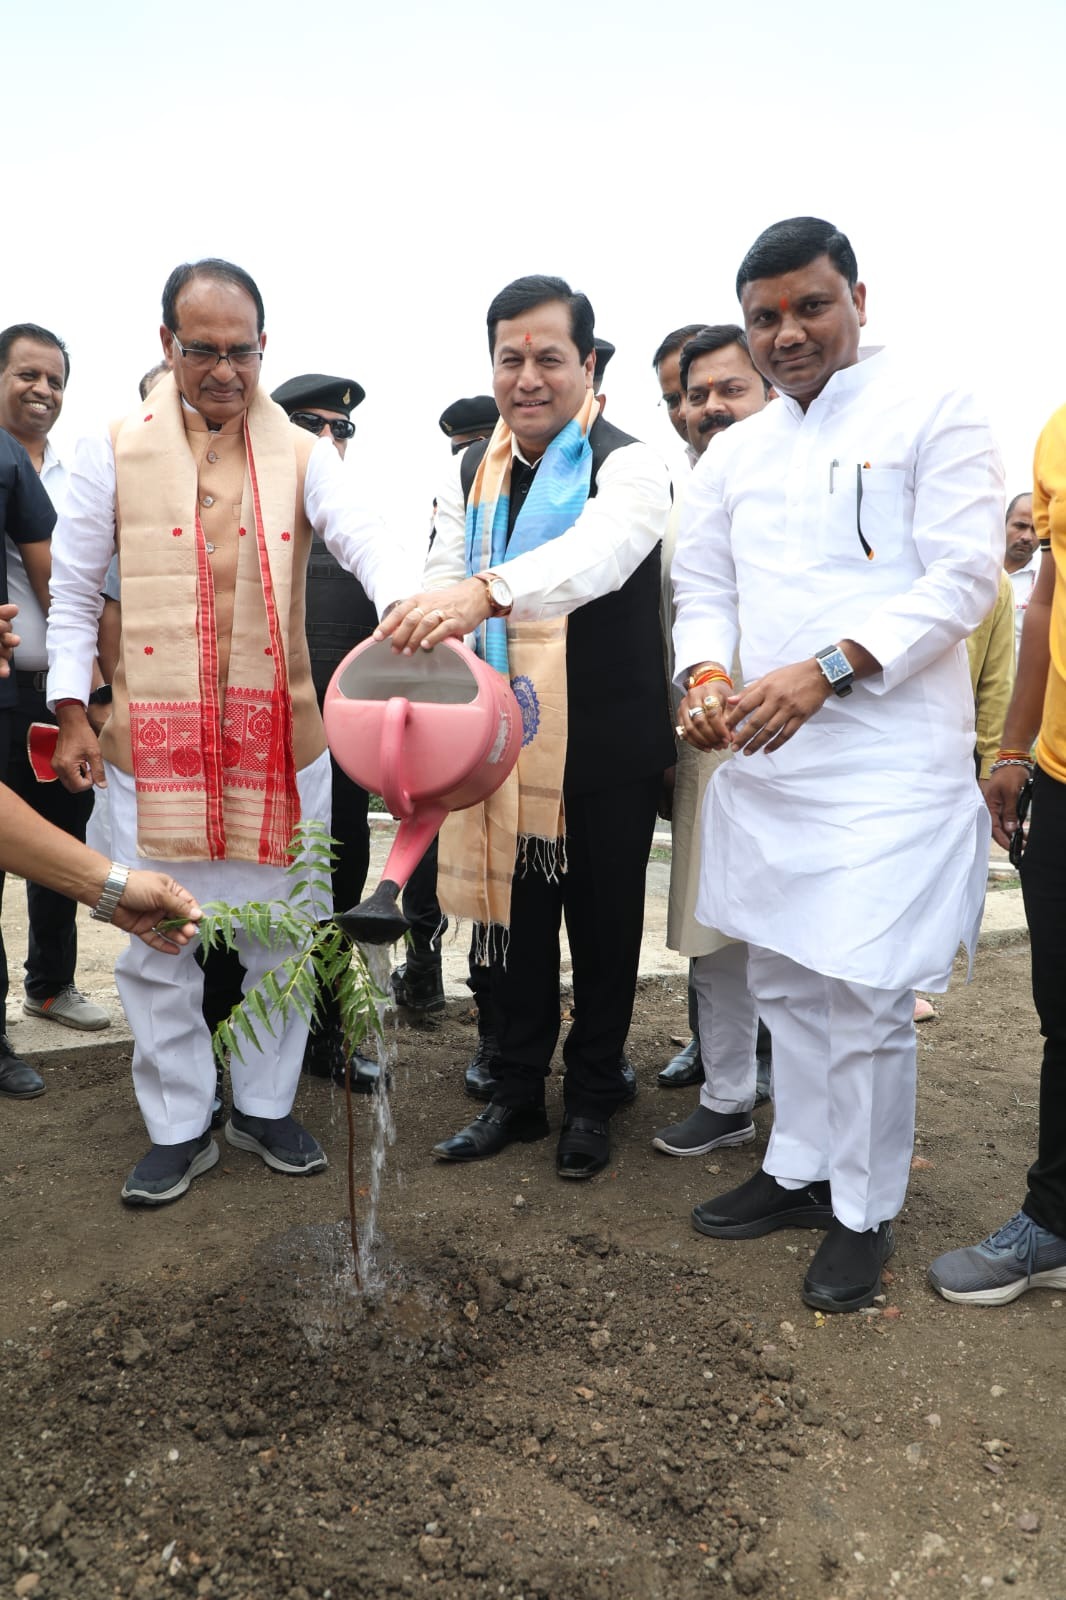 Chief Minister Shri Chouhan and Union AYUSH Minister Sarbananda Sonowal planted saplings of peepal, almond, neem and guava in the garden located at Shyamala Hills.